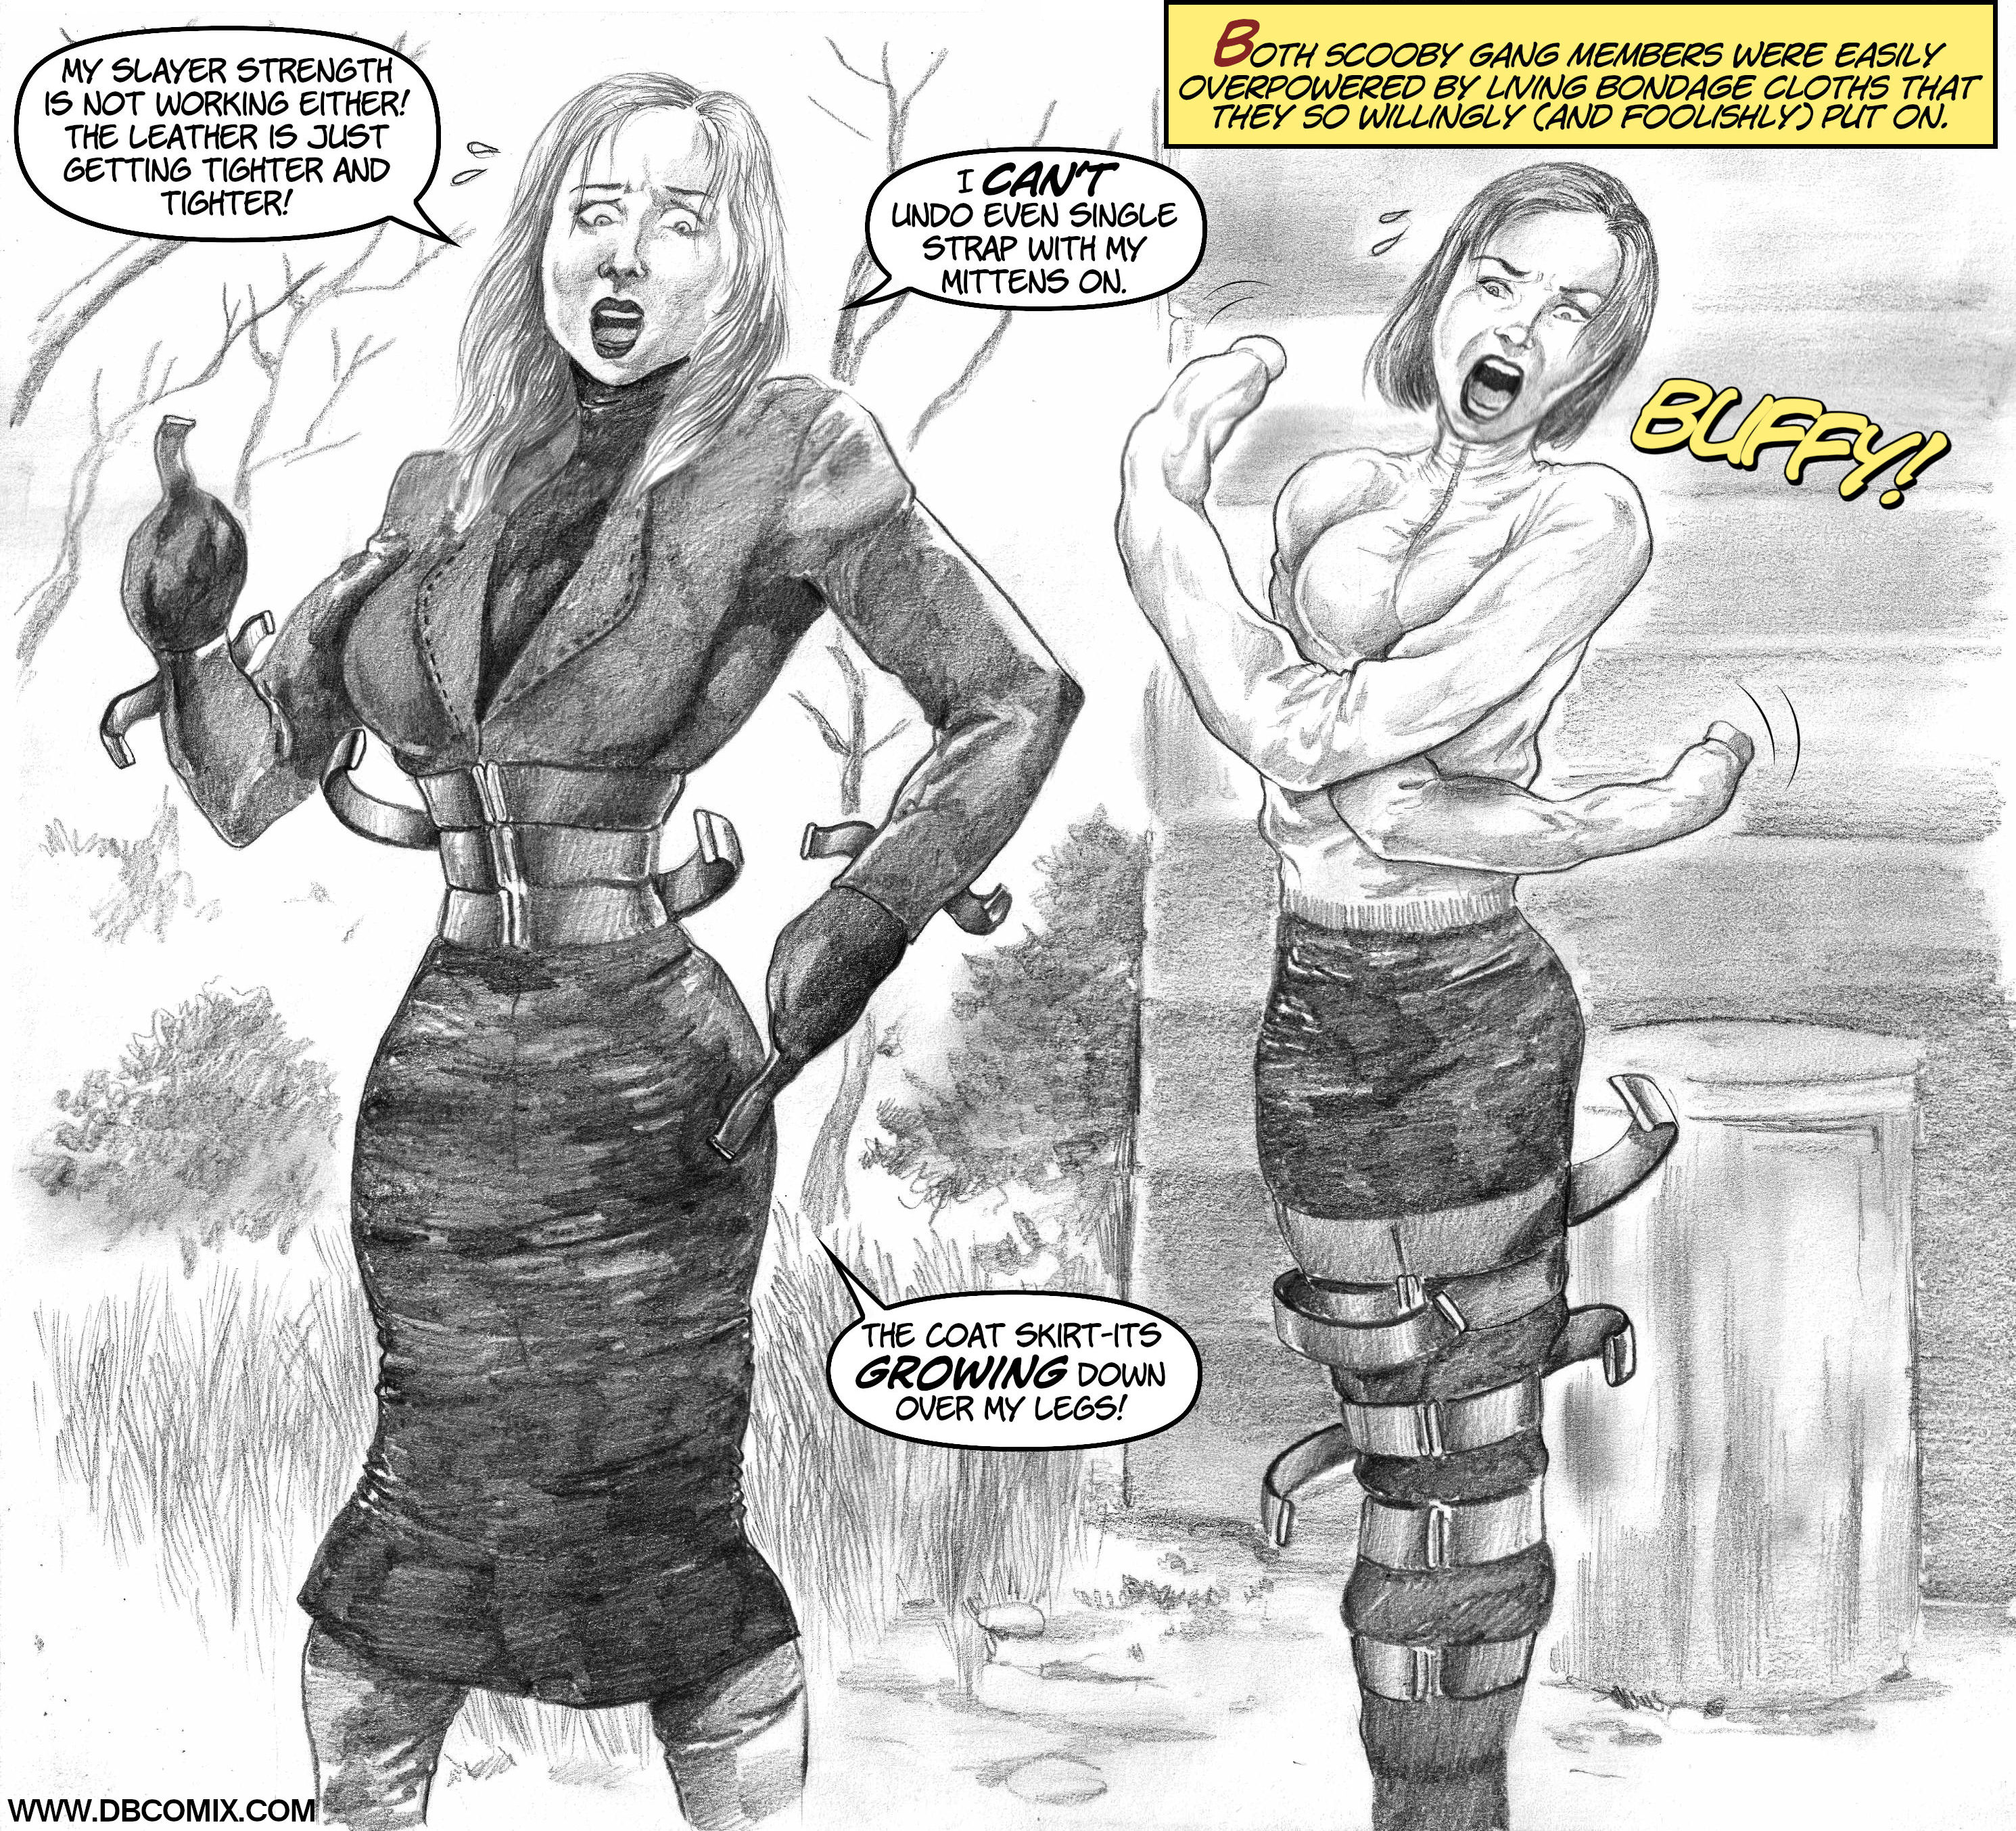 Buffy and Willow vs Living Cloth.jpg